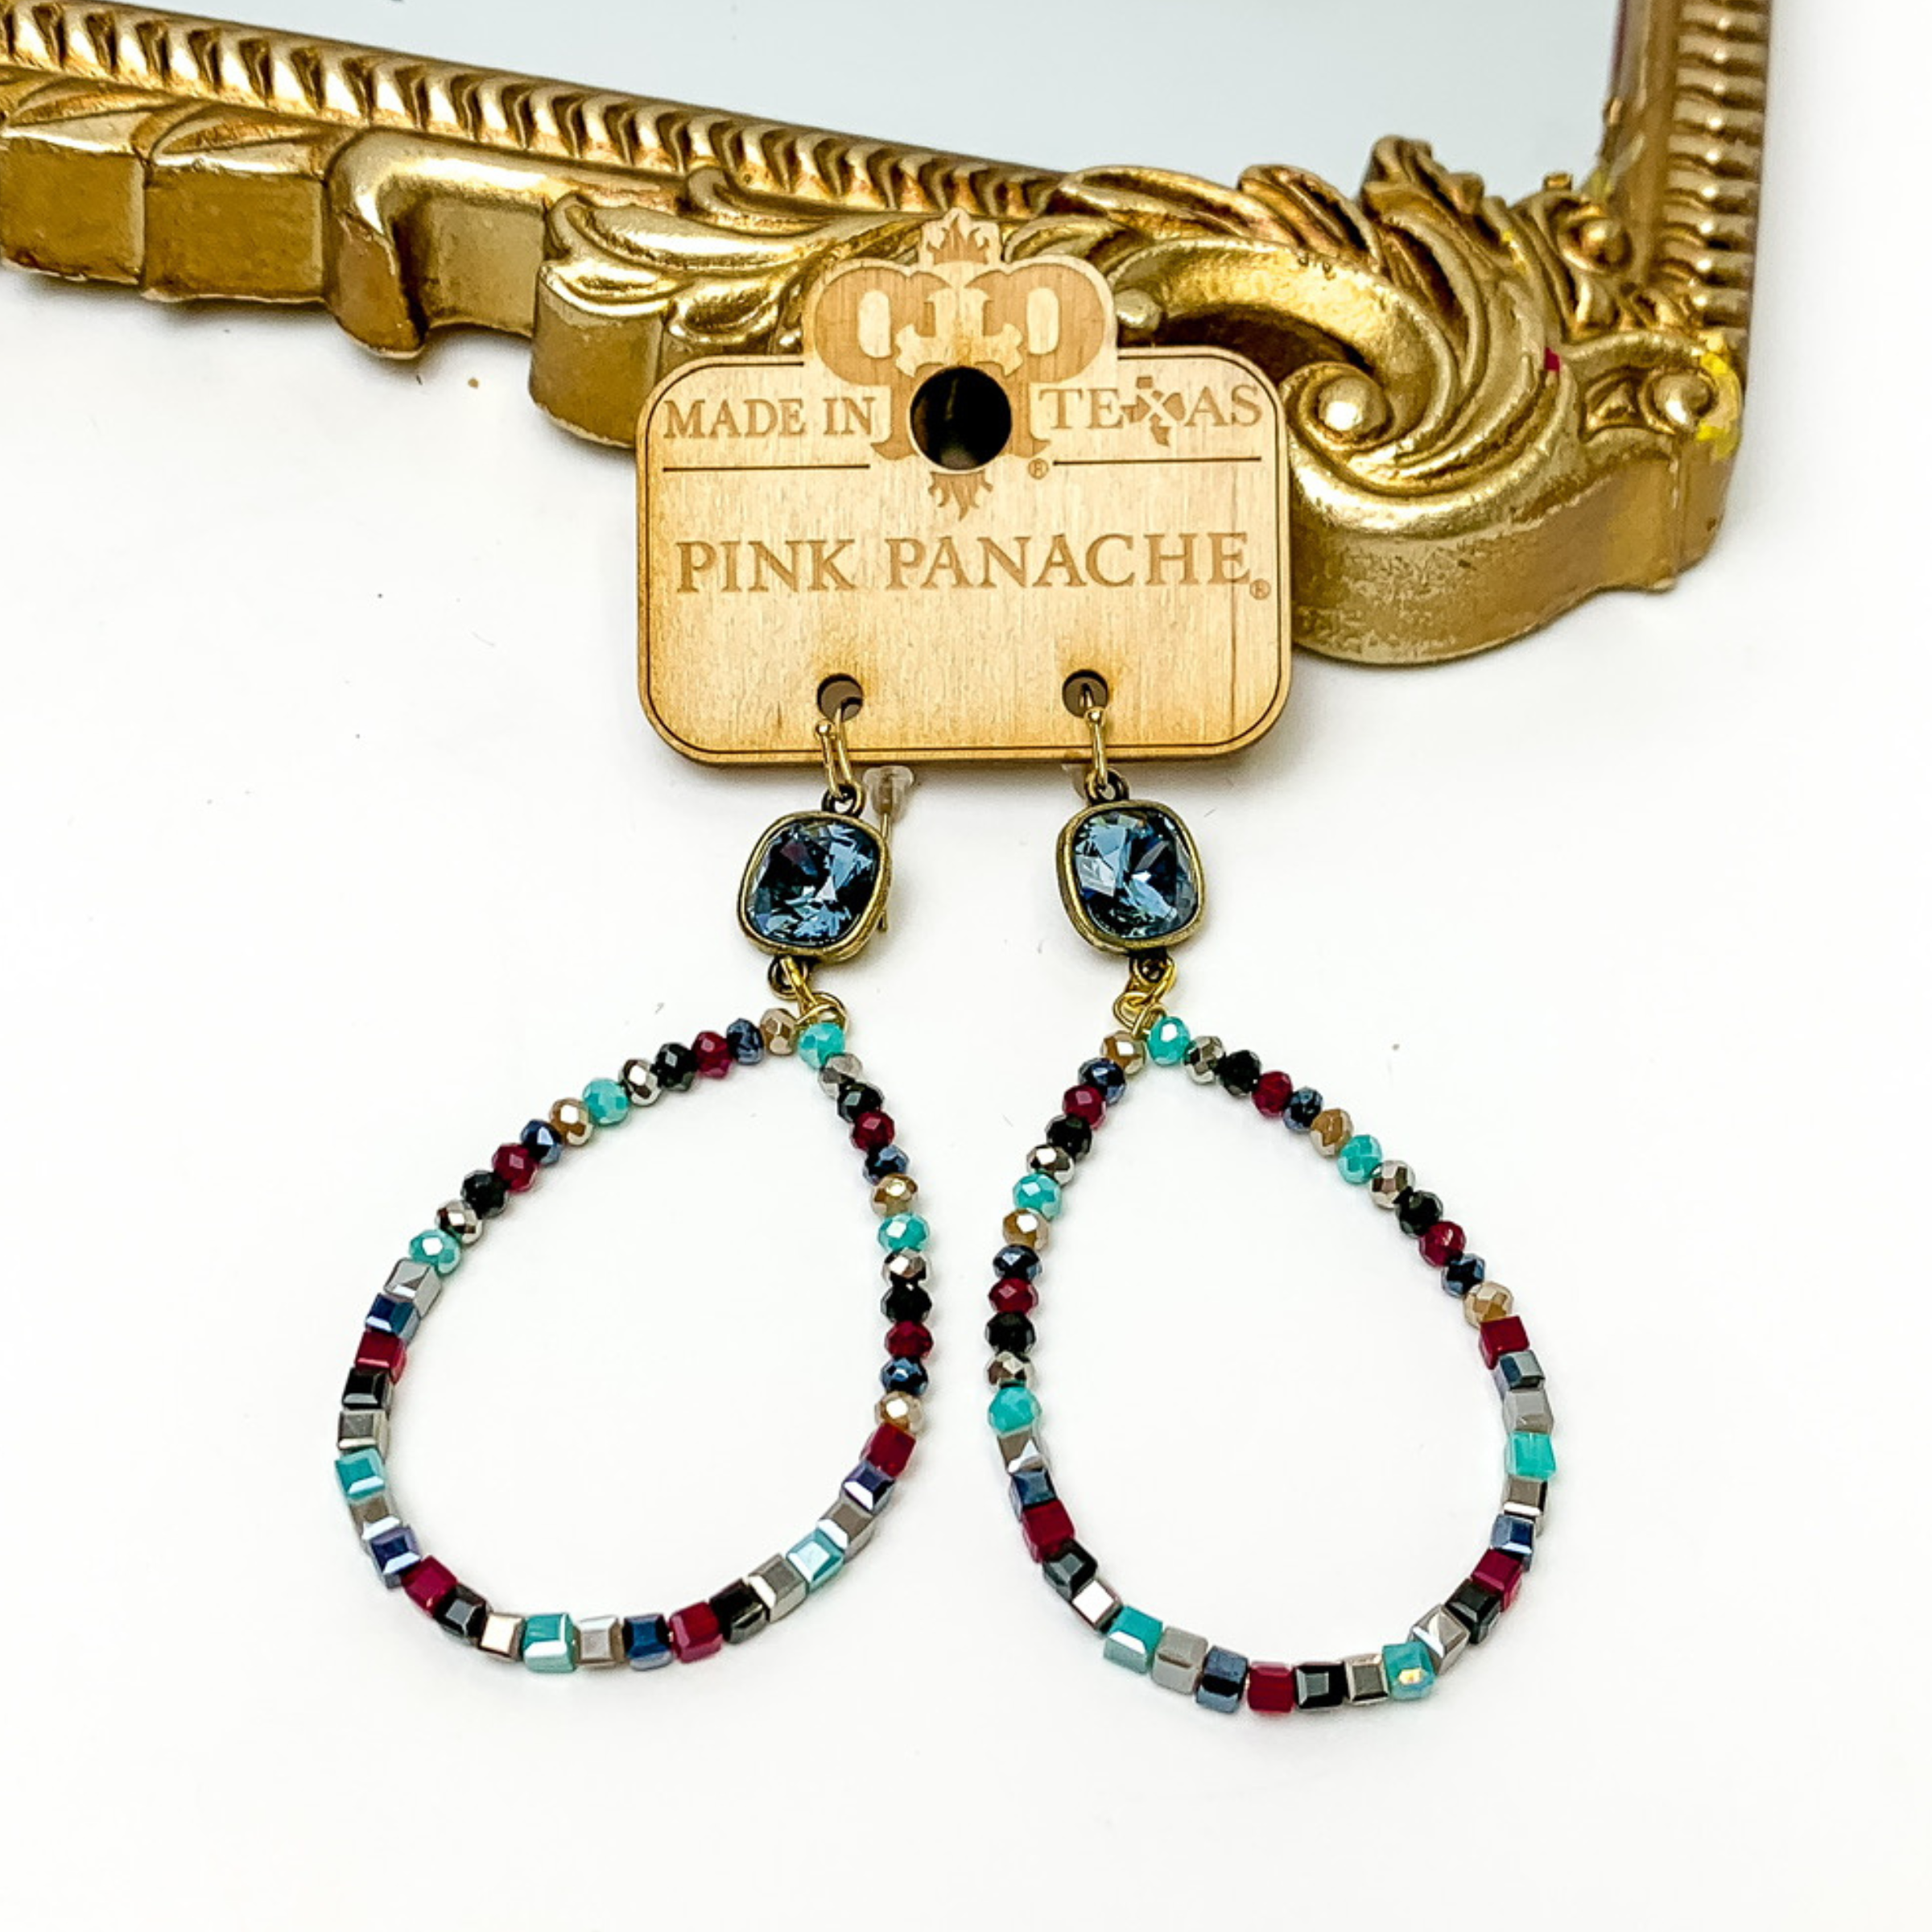 Denim blue cushion cut crystal drop earrings with a multicolored, beaded teardrop pendant. These earrings are pictured on a Pink Panache wood holder in front of a gold mirror and on a white background. 